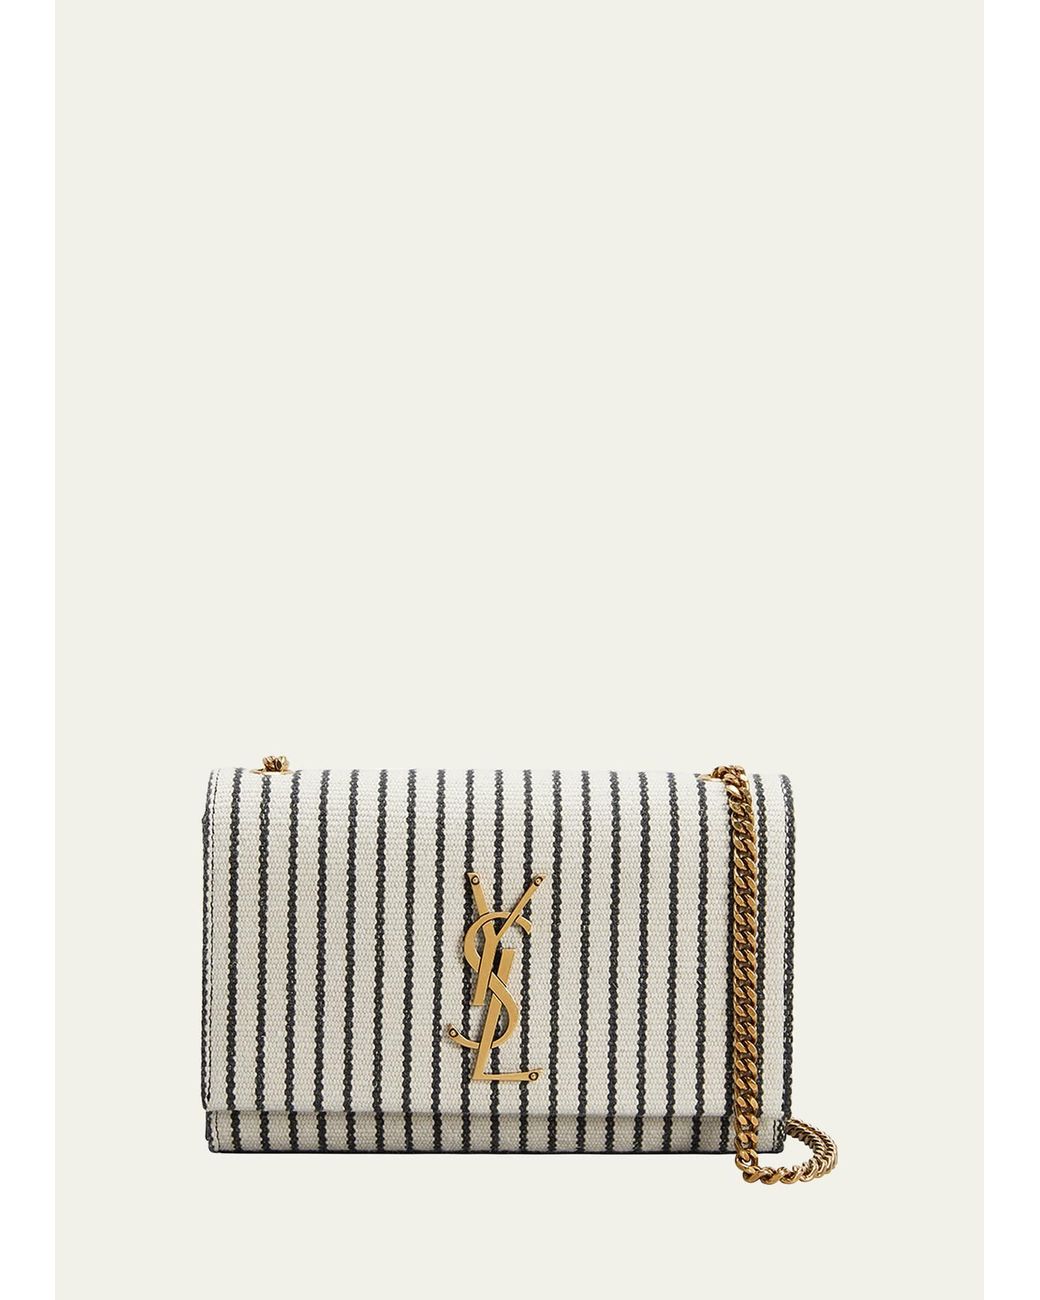 Saint Laurent Kate Small Ysl Striped Canvas Shoulder Bag in White | Lyst